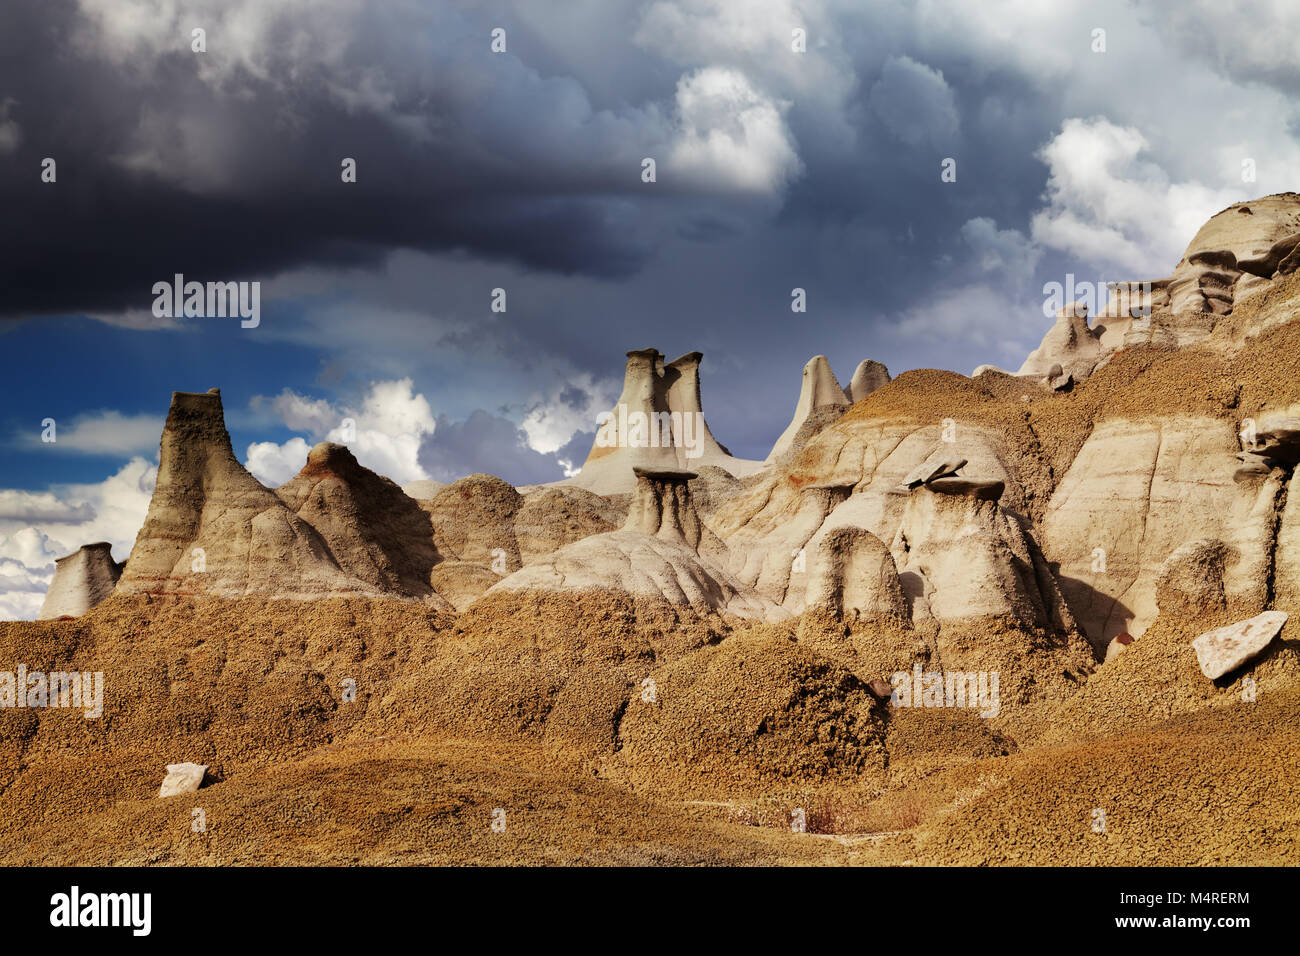 Rock formations in Bisti Badlands, New Mexico, USA Banque D'Images